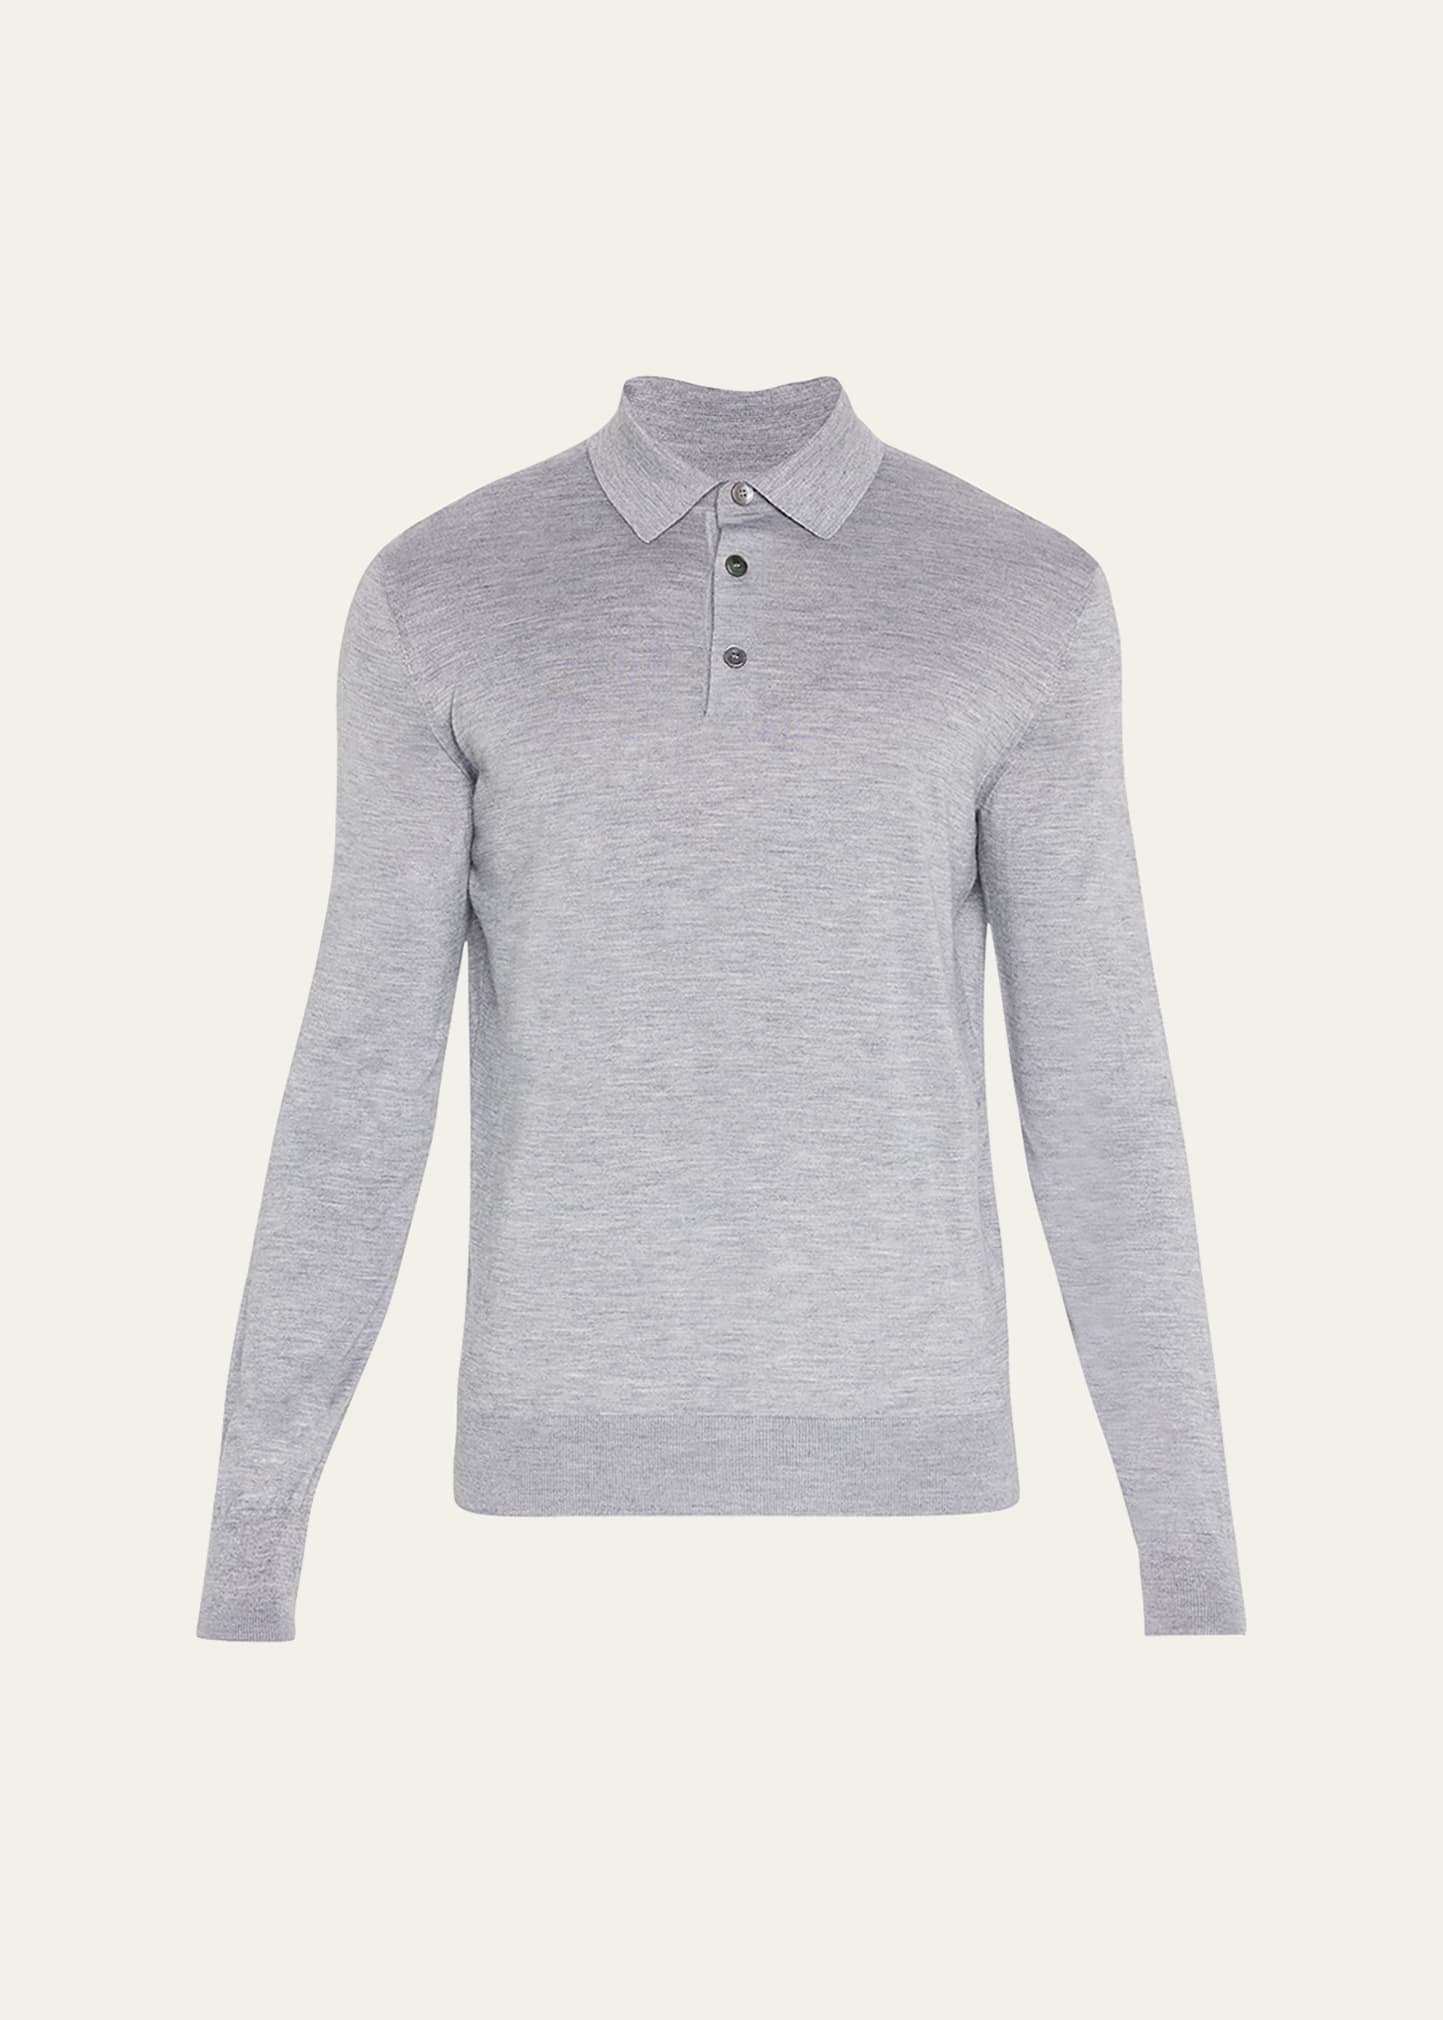 Zegna Men's Cashmere-silk Polo Shirt In Light Grey Solid